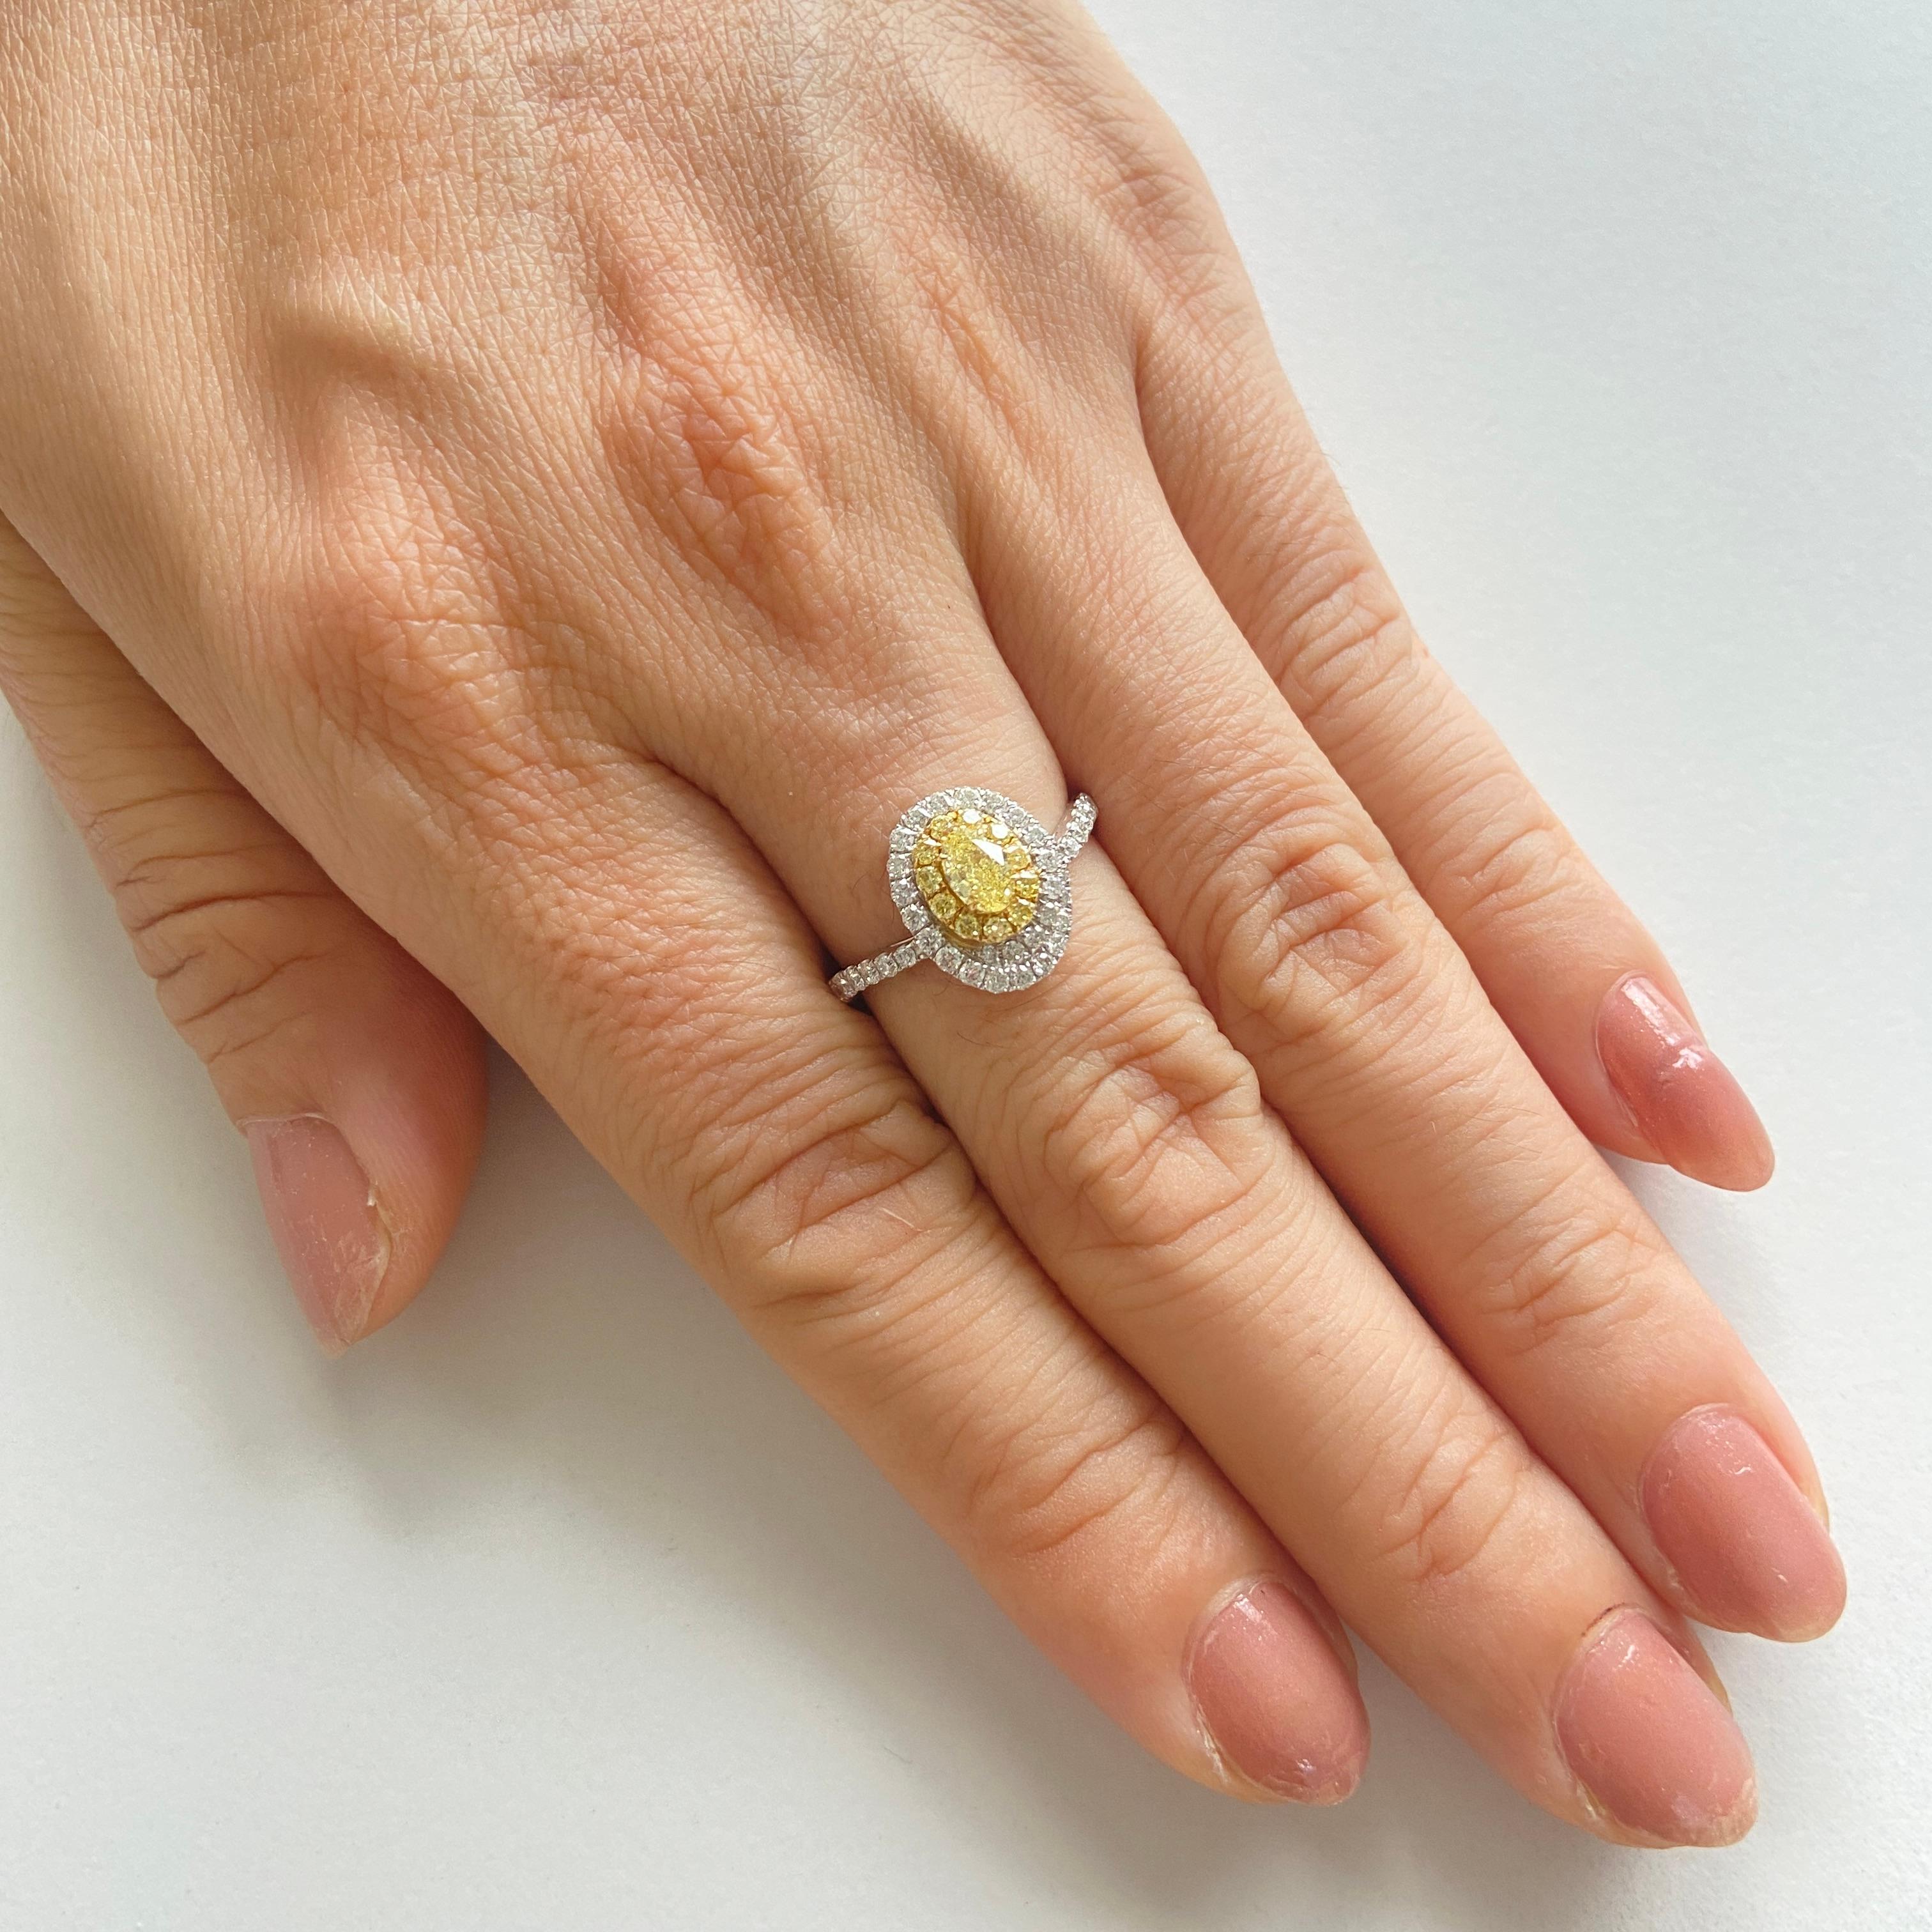 Customized design made to enhance Oval Yellow Diamond with a halo of Yellow and White diamonds. The ring is a perfect creation with a unique motif.

-	Centre Diamond is CGL Lab Certified Fancy Yellow diamond – 0.351 ct
-	Round Brilliant Cut Yellow